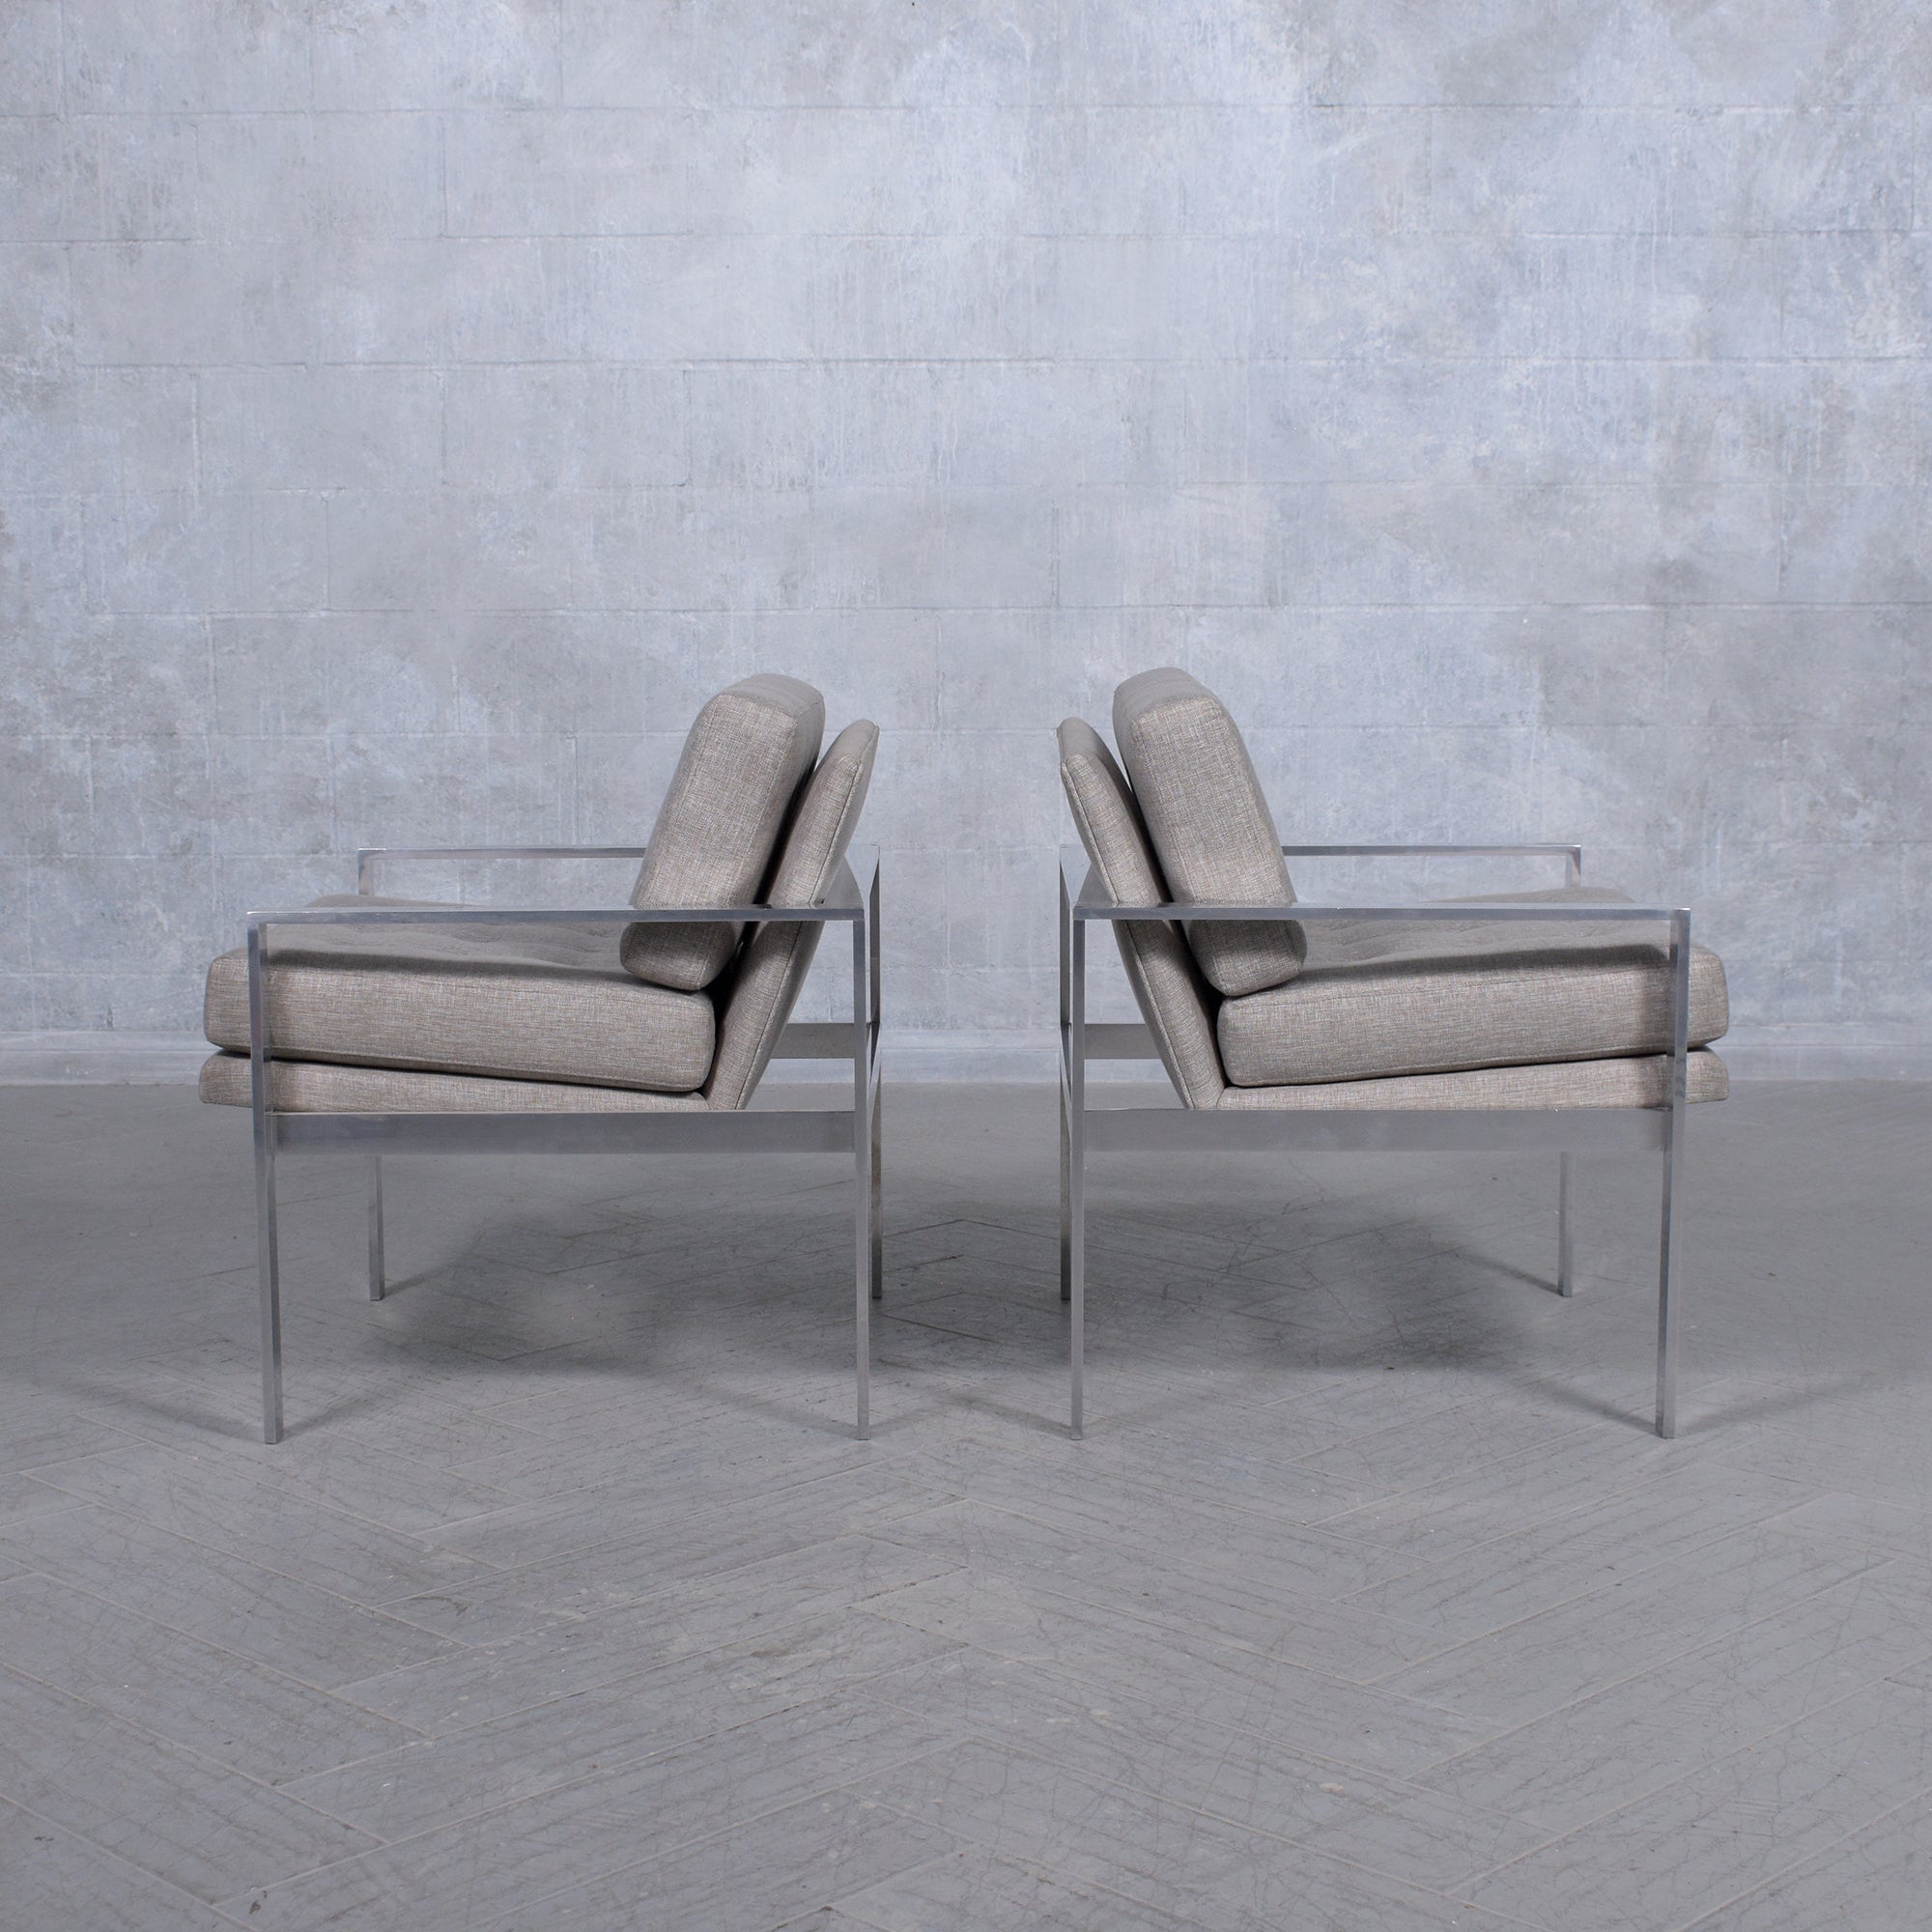 Restored Milo Baughman Lounge Chairs with Polished Aluminum Frames For Sale 3